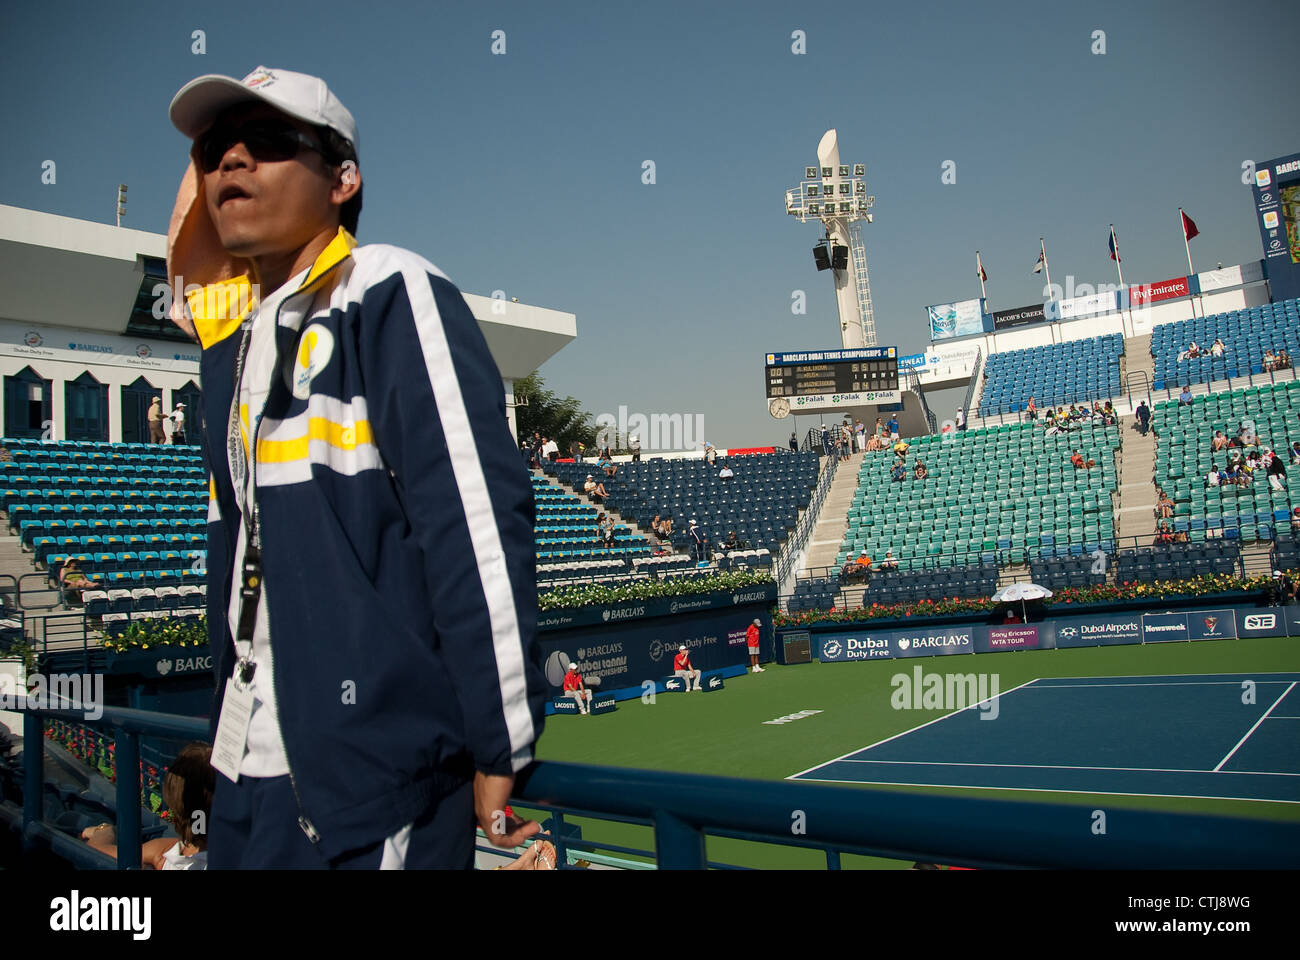 A volunteer takes a break at The Barclays Dubai Tennis Championships Stock Photo